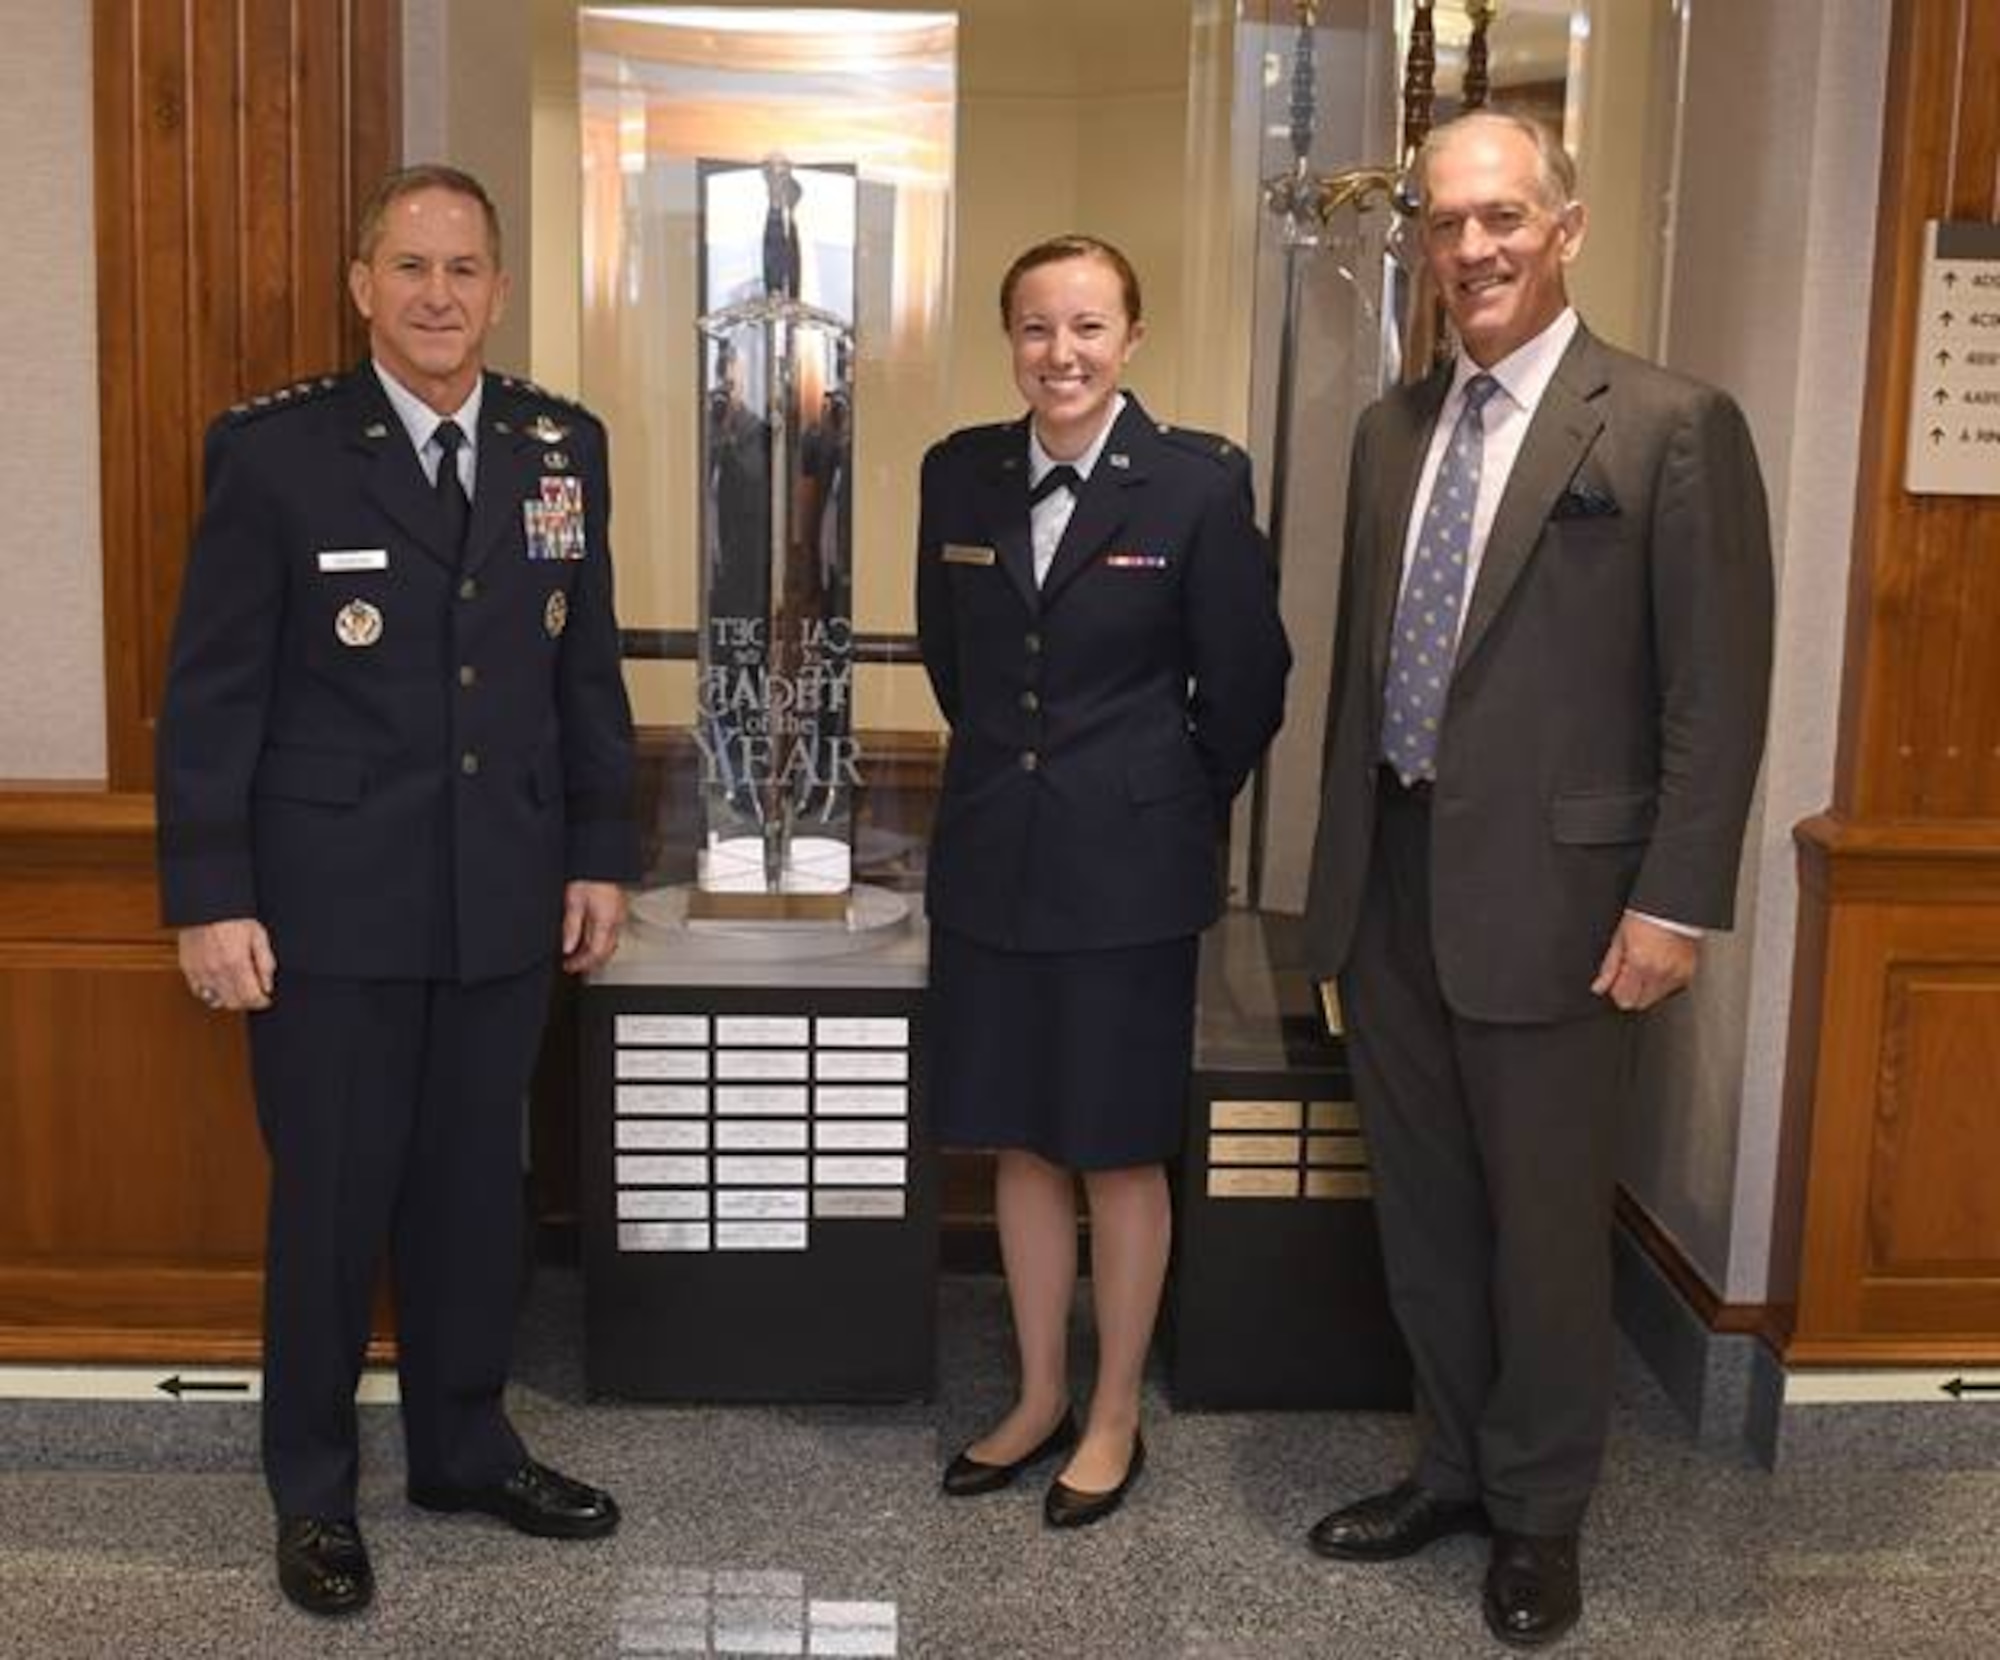 Air Force Chief of Staff Gen. David L. Goldfein (left) posed for a photo with 2019 Cadet of the Year, 2nd Lt. Kirsten Cullinan, and Jonathan Elwes of the Royal Air Squadron Oct. 22, 2019, at the Pentagon, Arlington, Va. (Air Force photo by Andy Morataya)